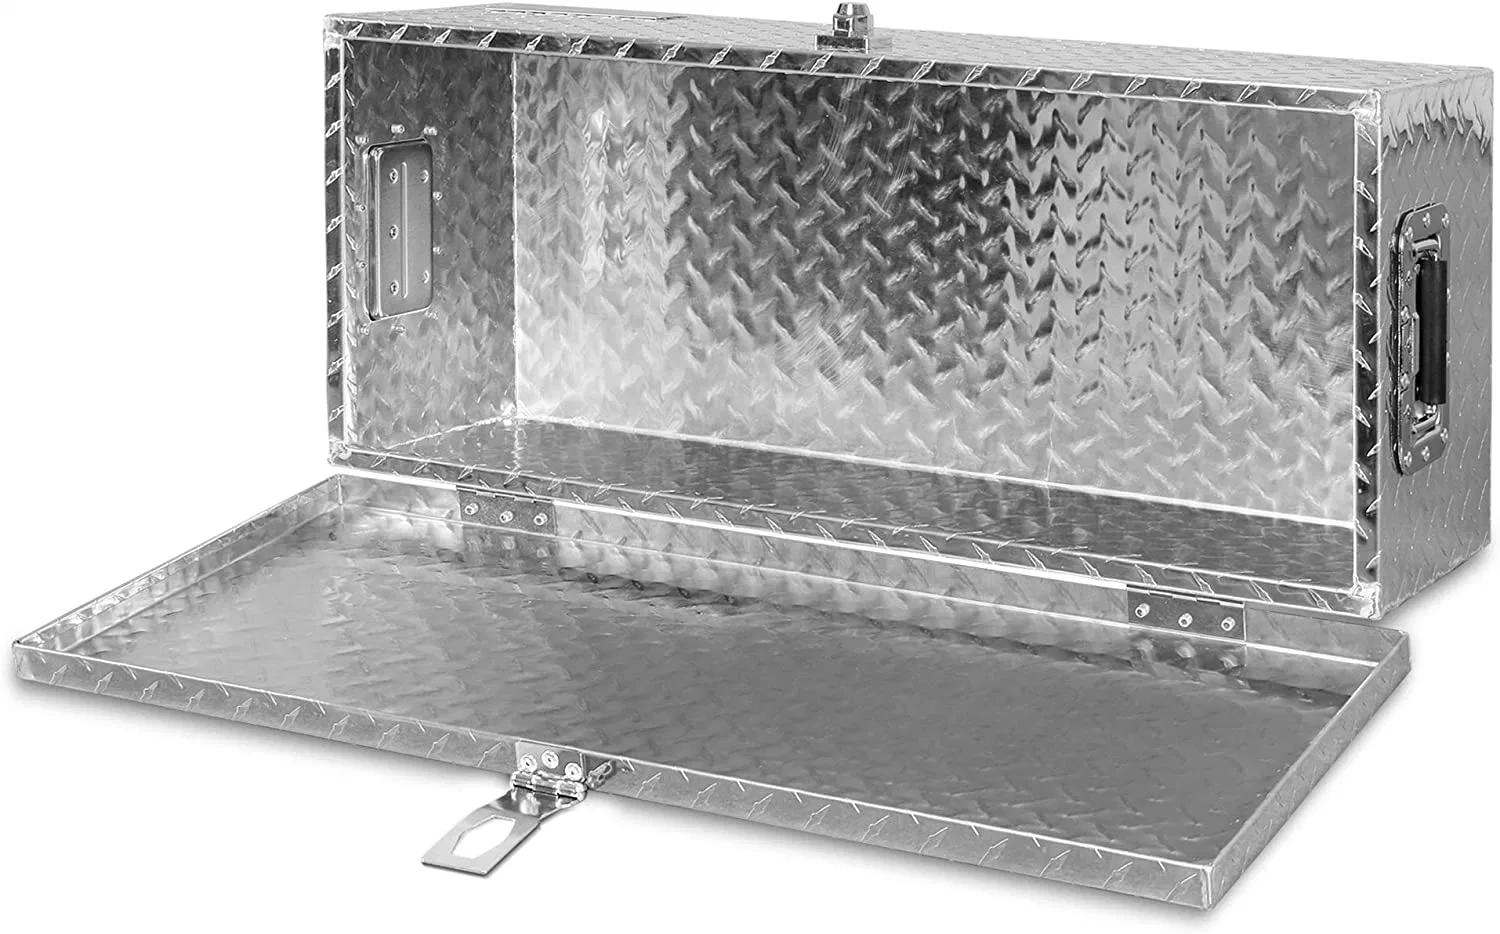 ARKSEN 30 Inch Heavy Duty Aluminum Diamond Plate Tool Box Chest Box Pick Up Truck Bed RV Trailer Toolbox with Side Handle and Lock Keys